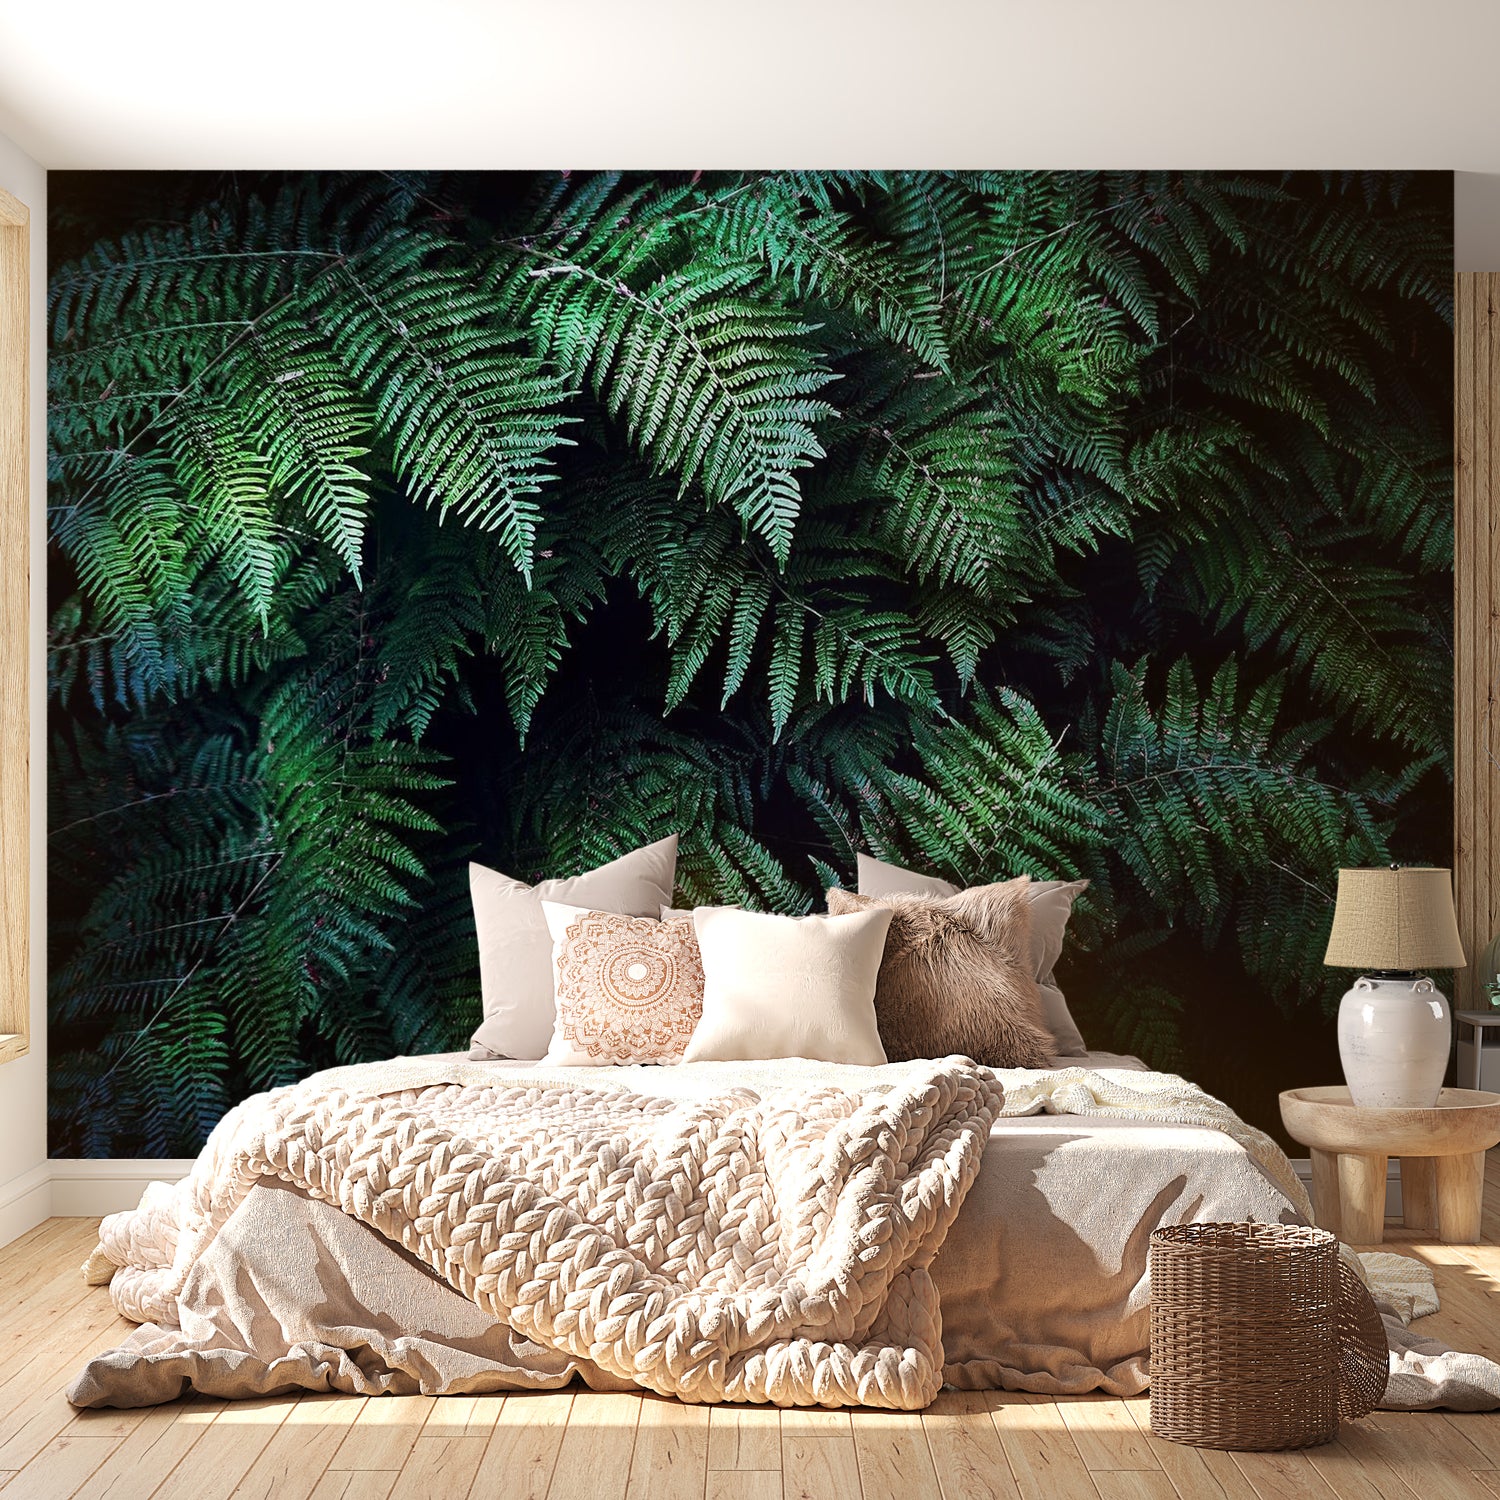 Peel & Stick Nature Wall Mural - Dark Green Fern Leaves - Removable Wall Decals